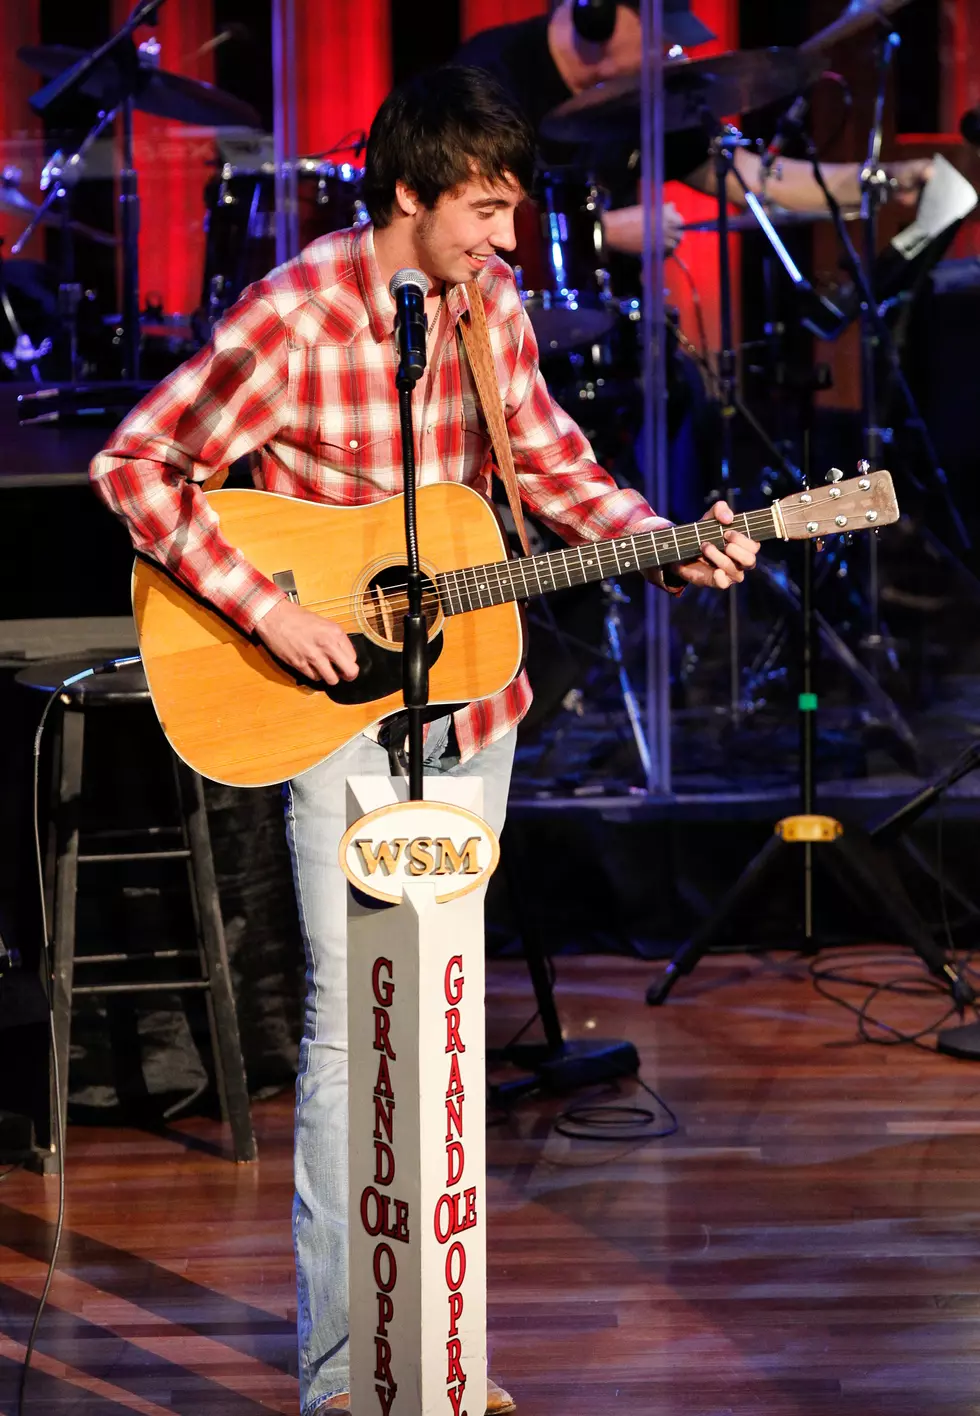 Make Travel Plans Now To See Mo Pitney At Grand Ole Opry